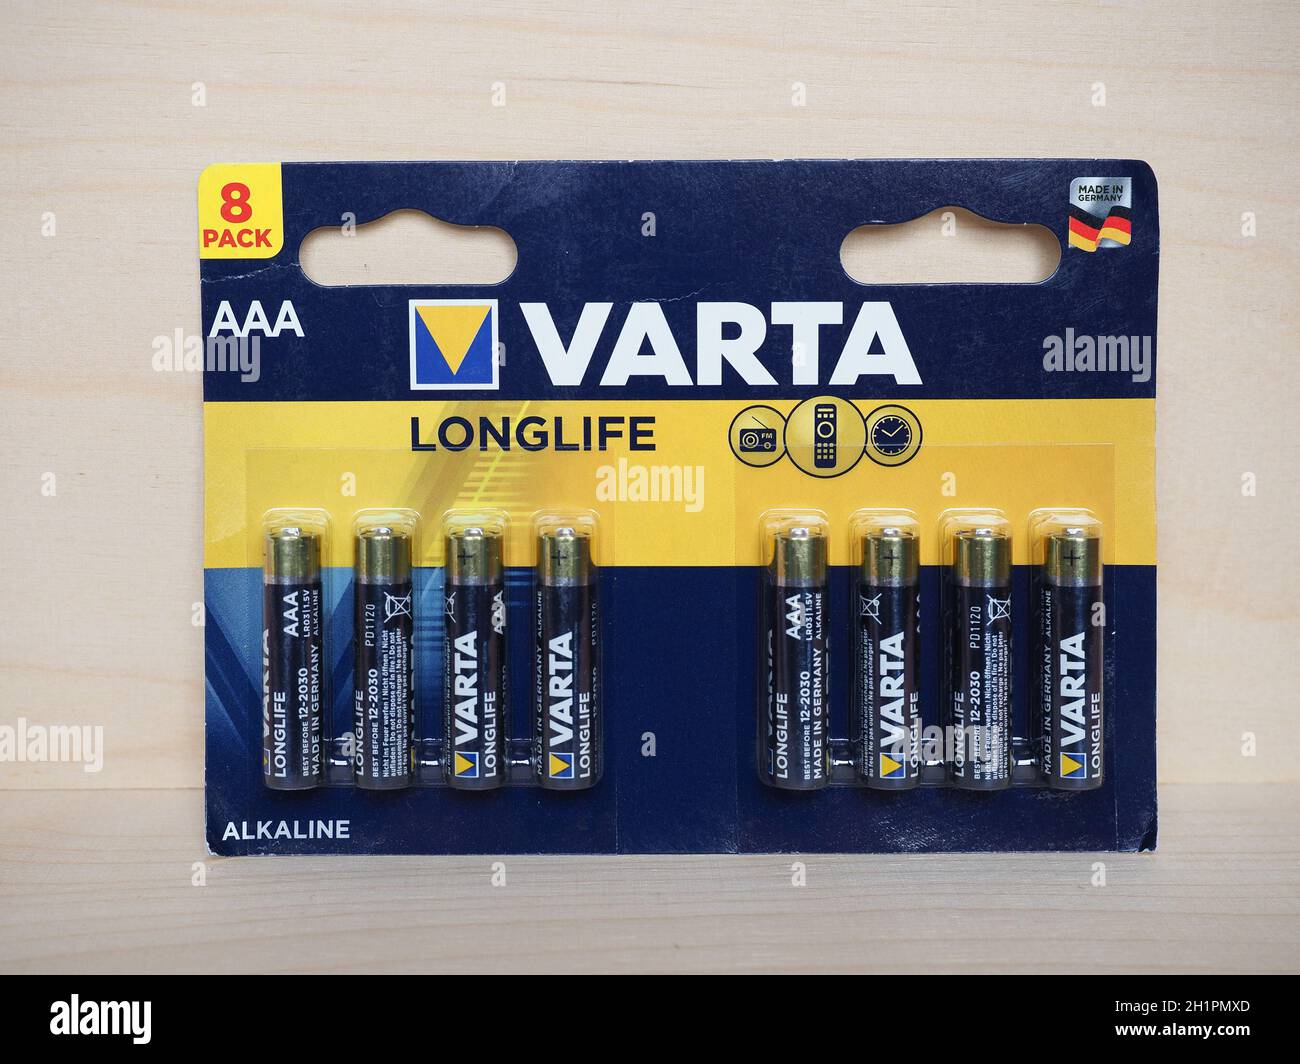 Varta German Batteries High Resolution Stock Photography and Images - Alamy